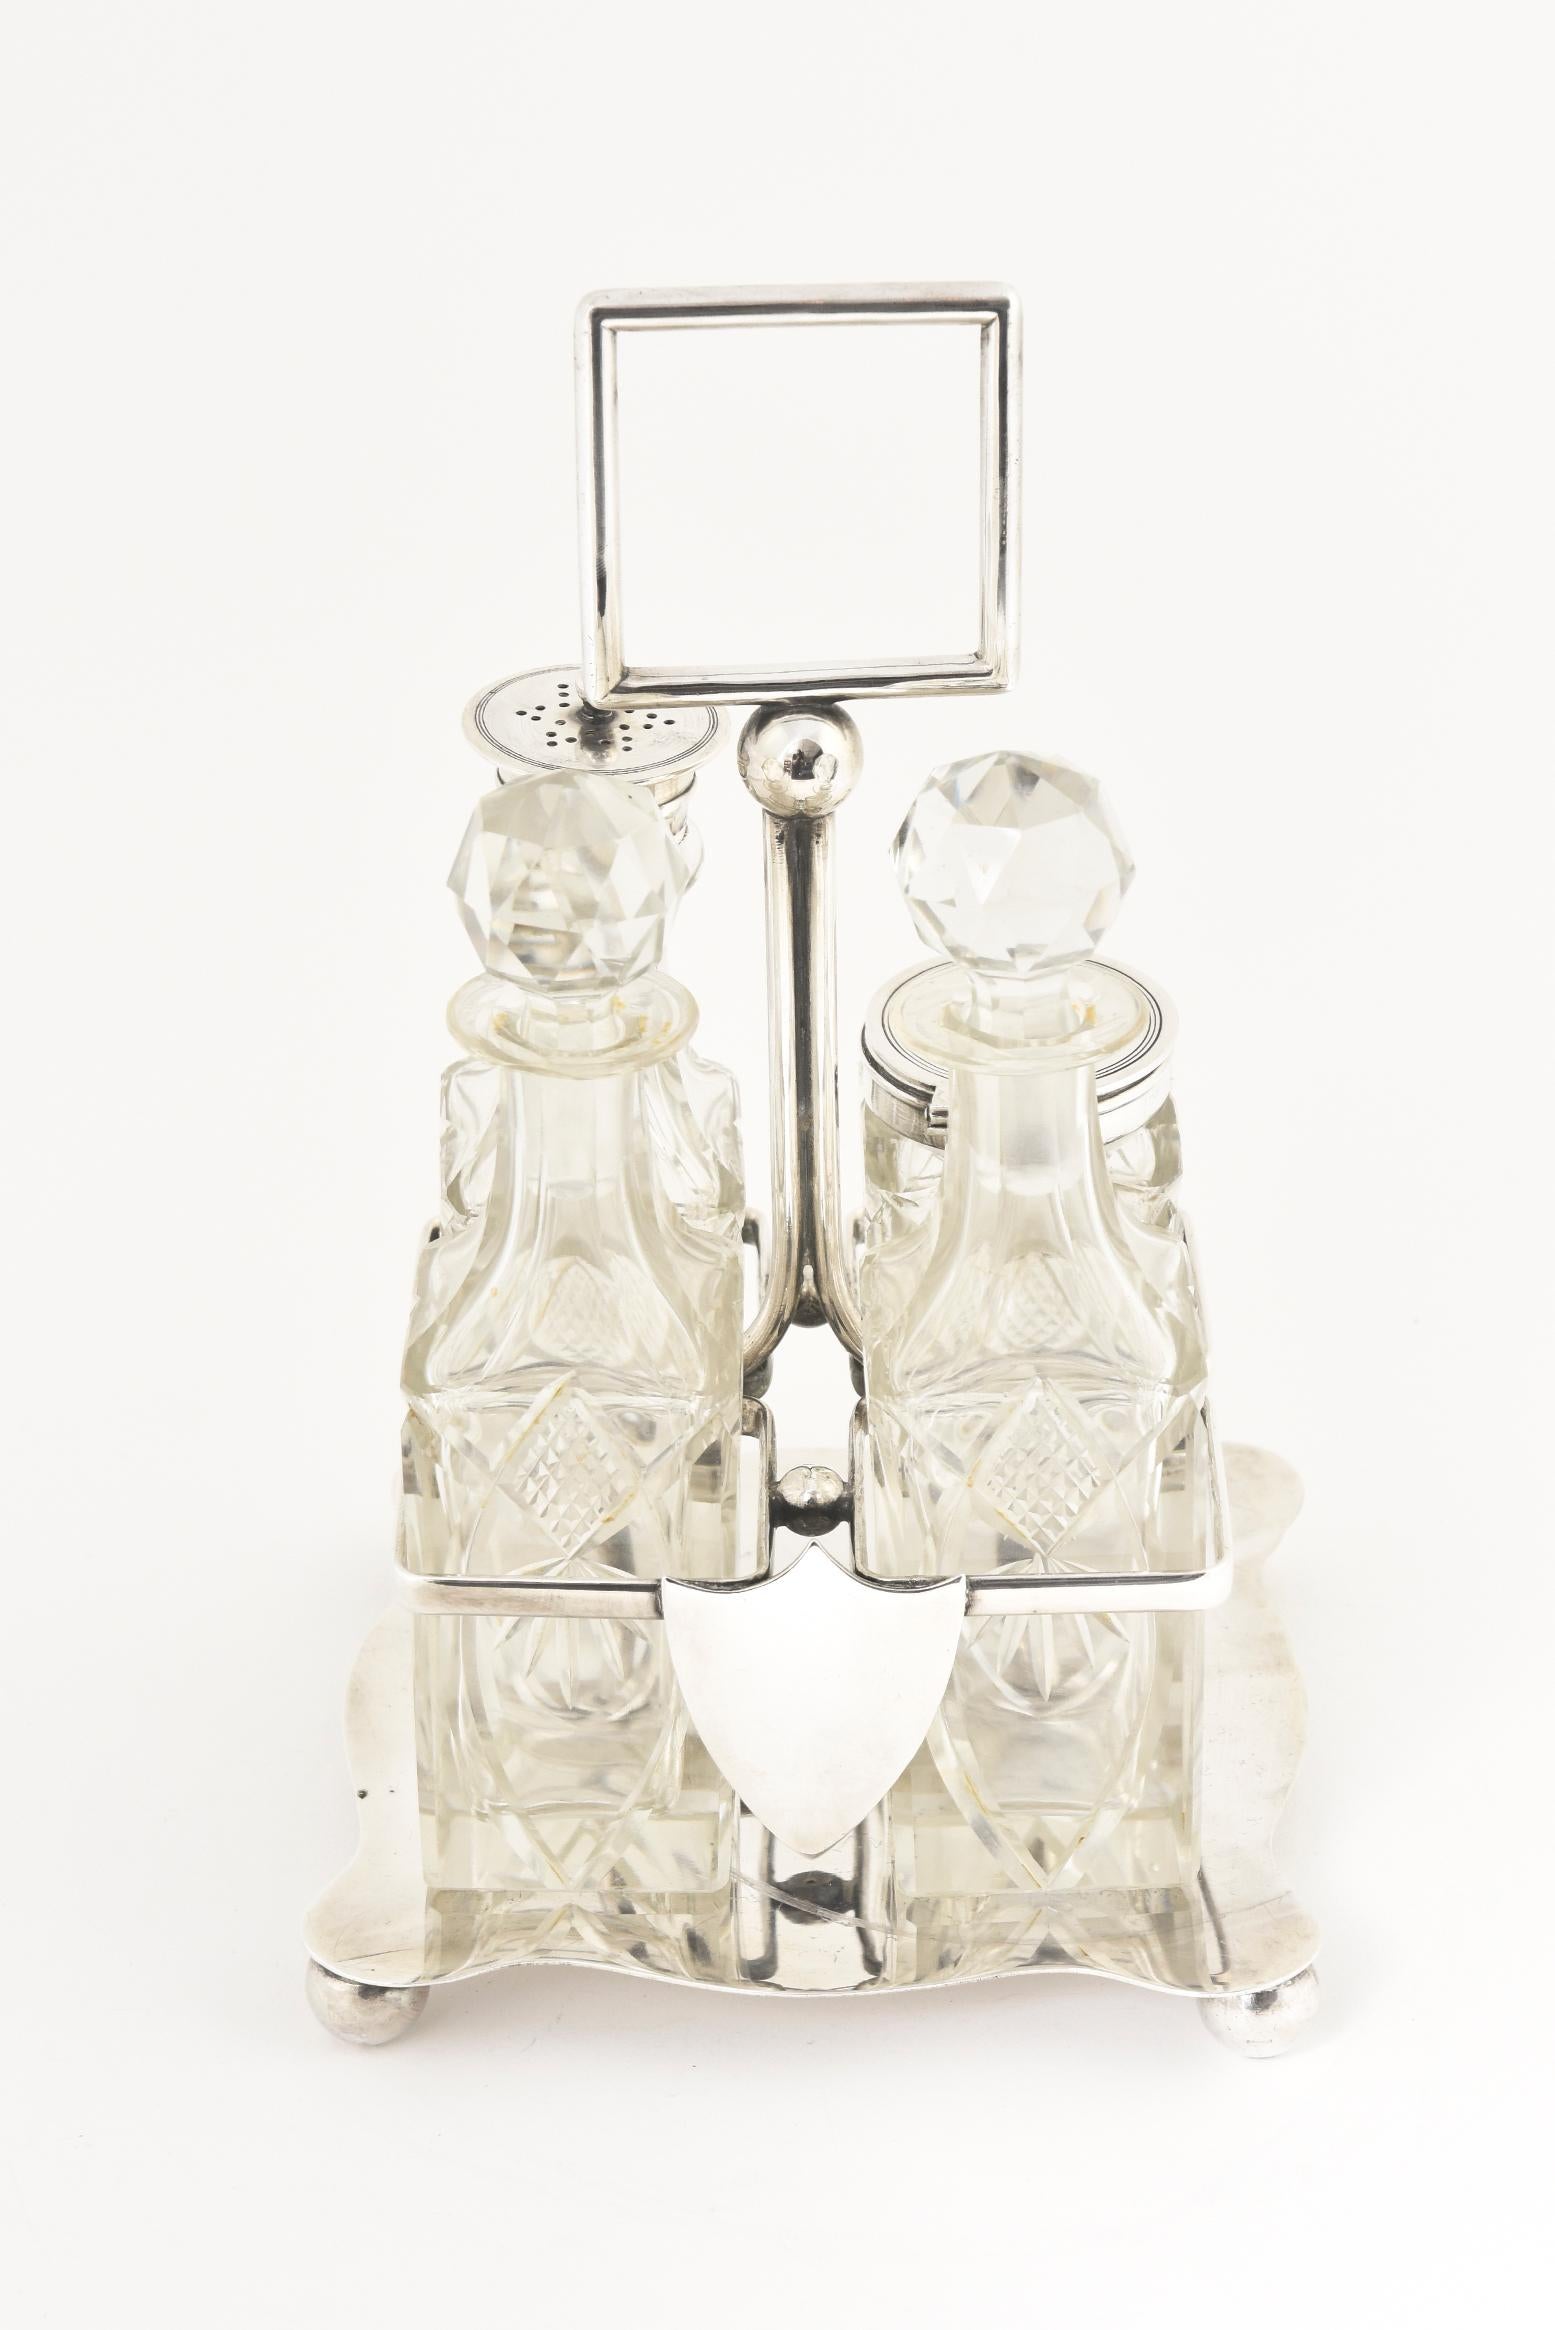 Antique silver-plate castor set with four cut-crystal bottles: shaker, oil, vinegar, and mustard or jam. The bottles are displayed in a fitted silver-plate stand with a central handle.
Includes at pair of matching bottles 1.5” x 6”
Bottle with